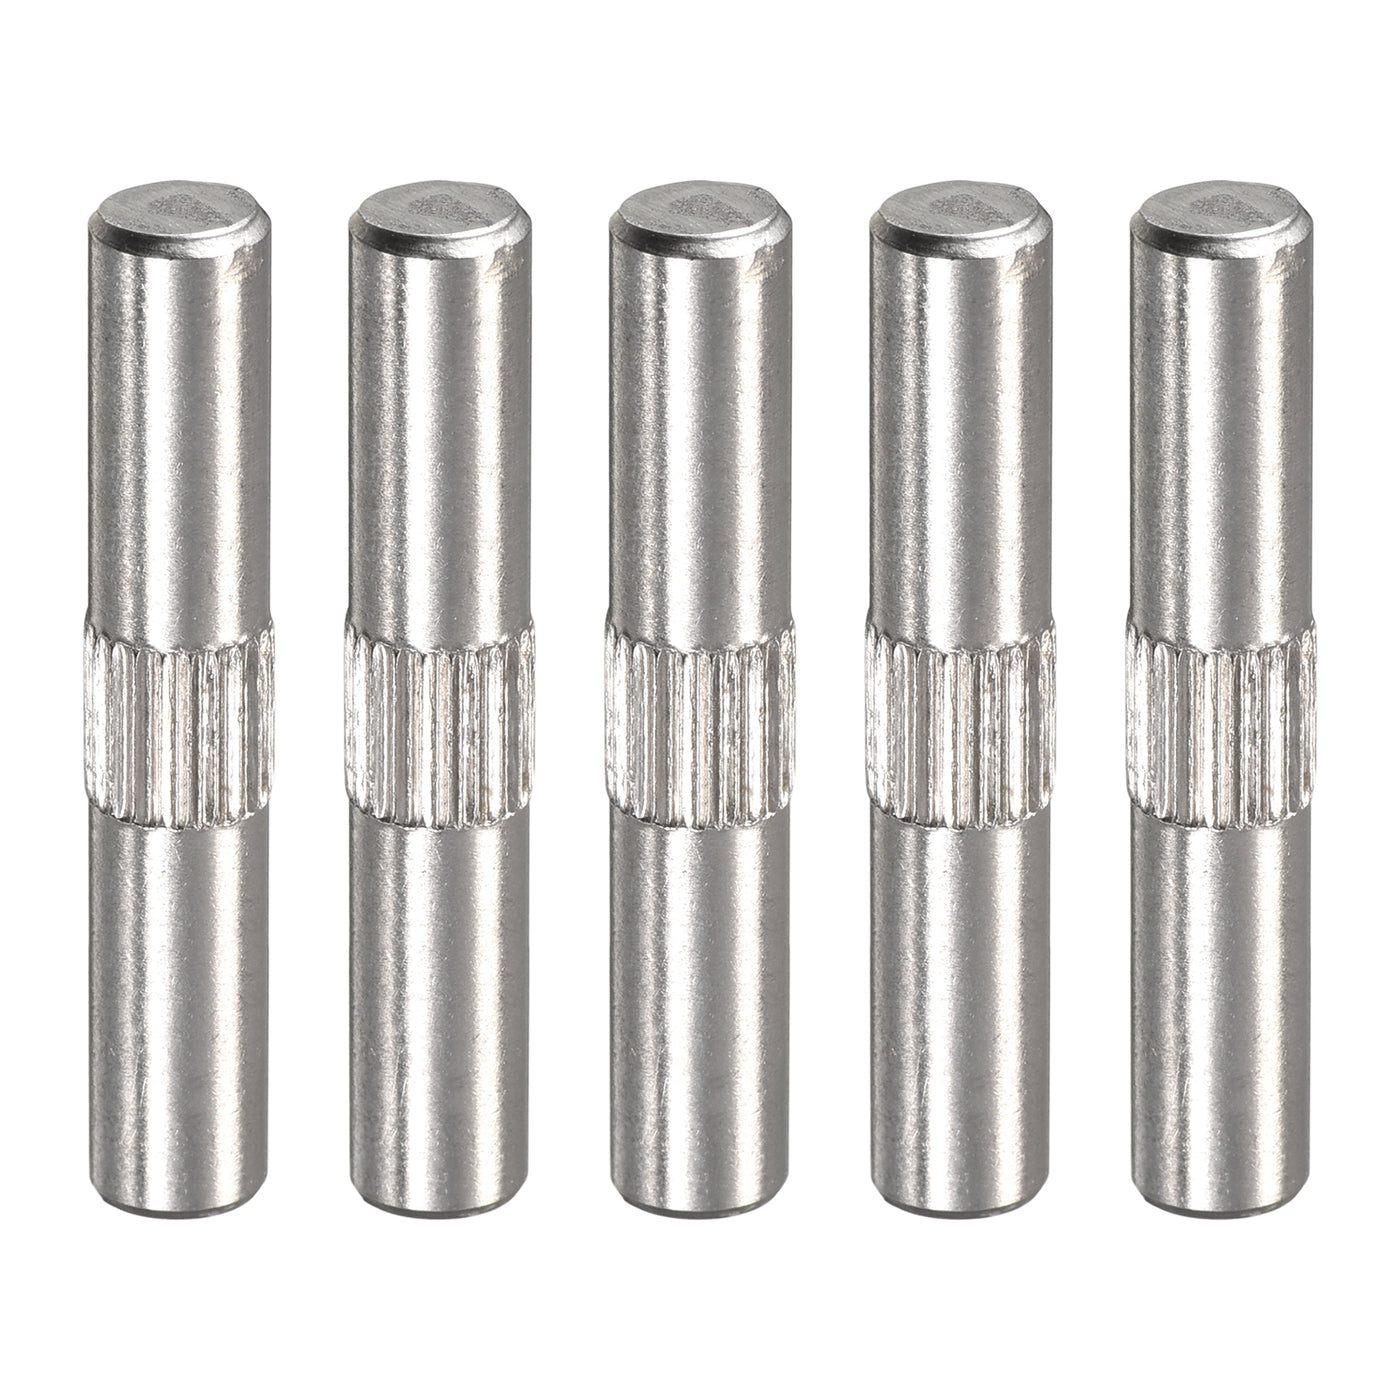 uxcell Uxcell 5x30mm 304 Stainless Steel Dowel Pins, 5Pcs Center Knurled Chamfered End Pin